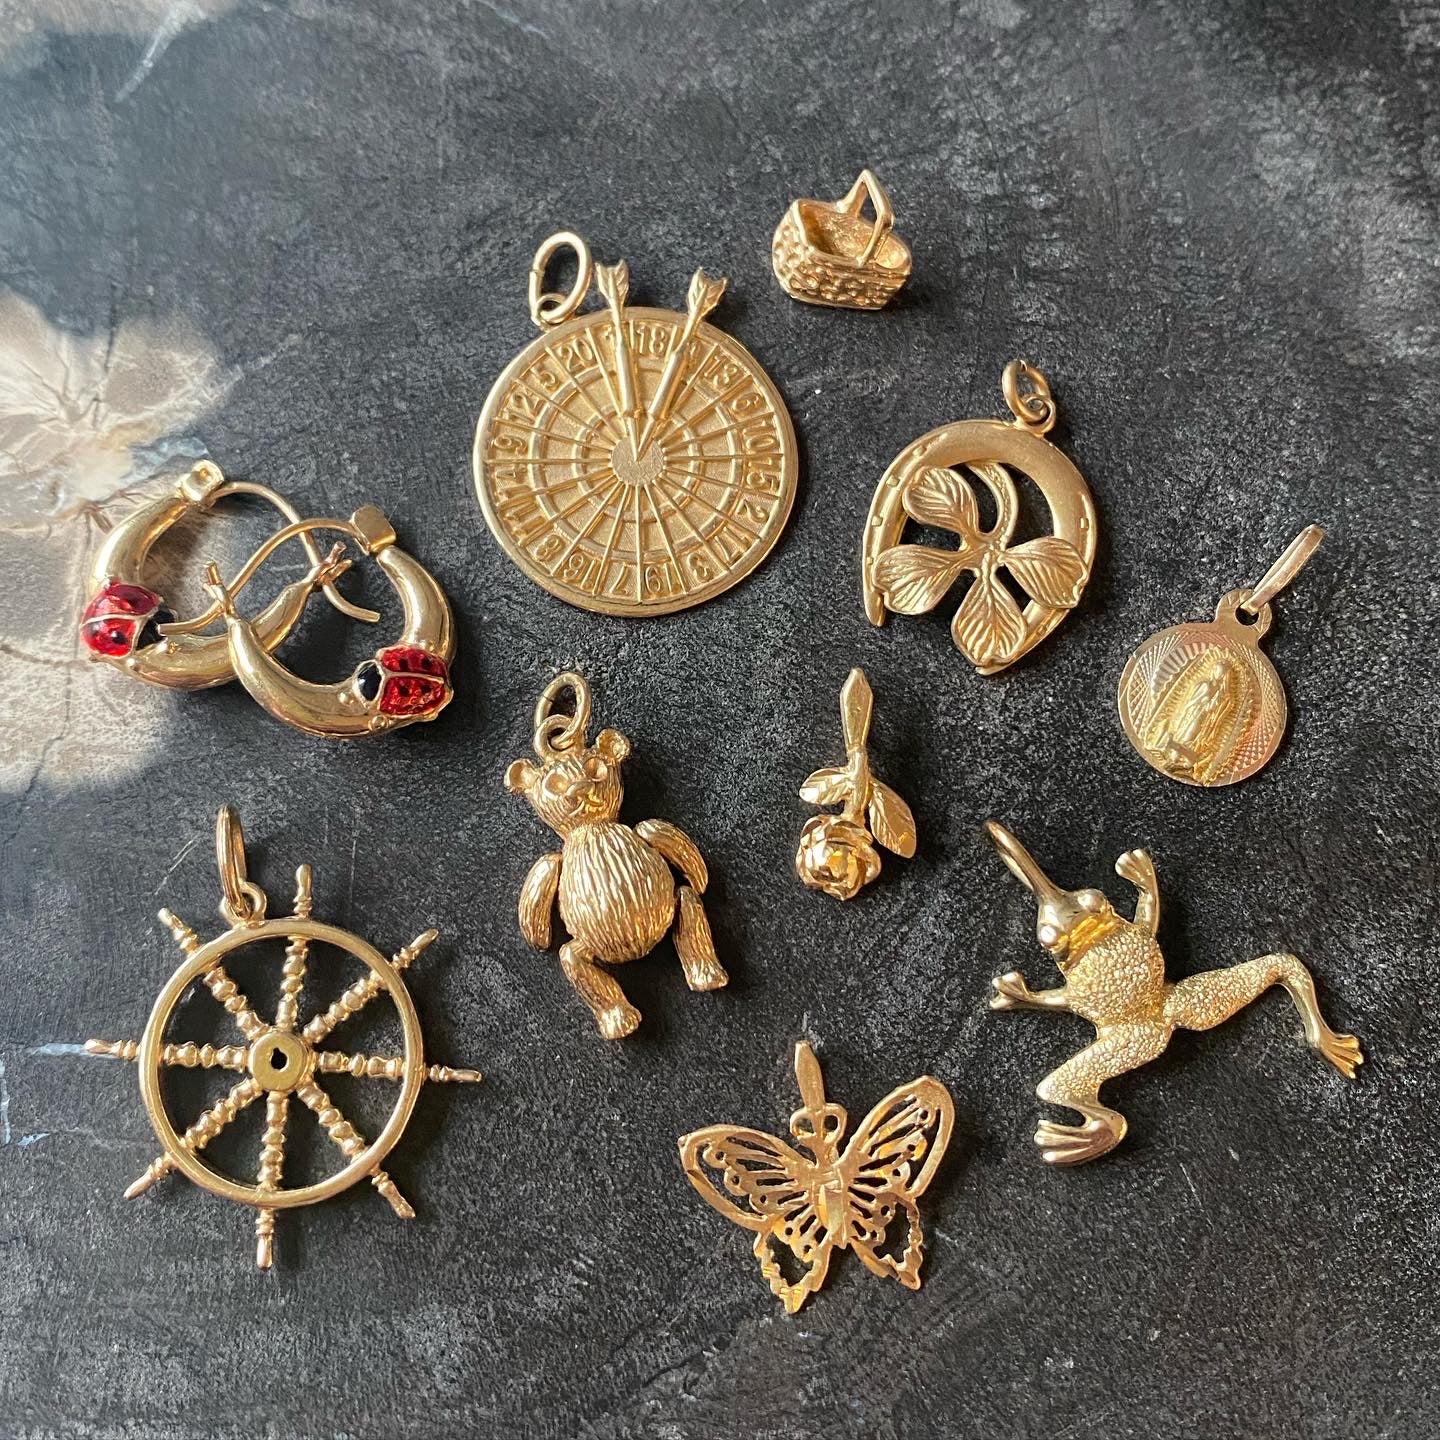 An assortment of vintage 14k gold charms and pendants